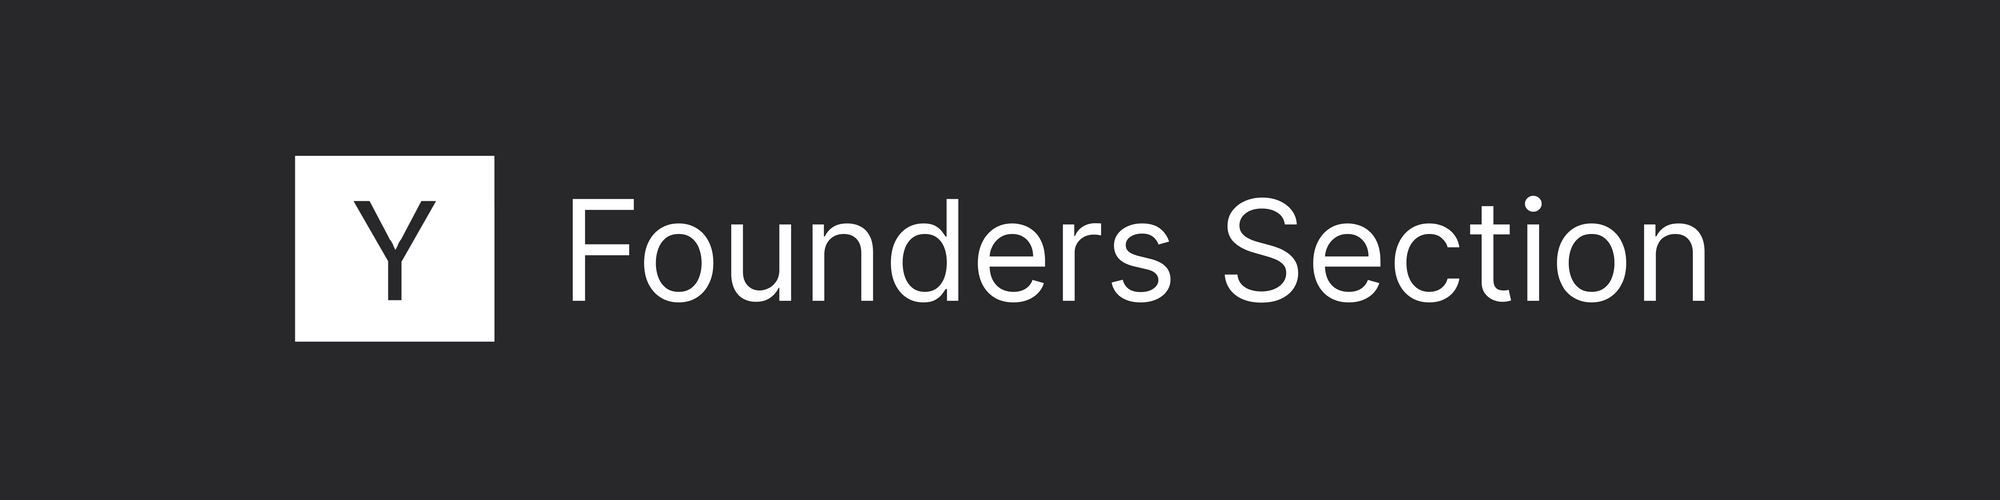 White on black banner graphic that states the section heading: Founders Section. This references the corresponding section of the Y Combinator application.